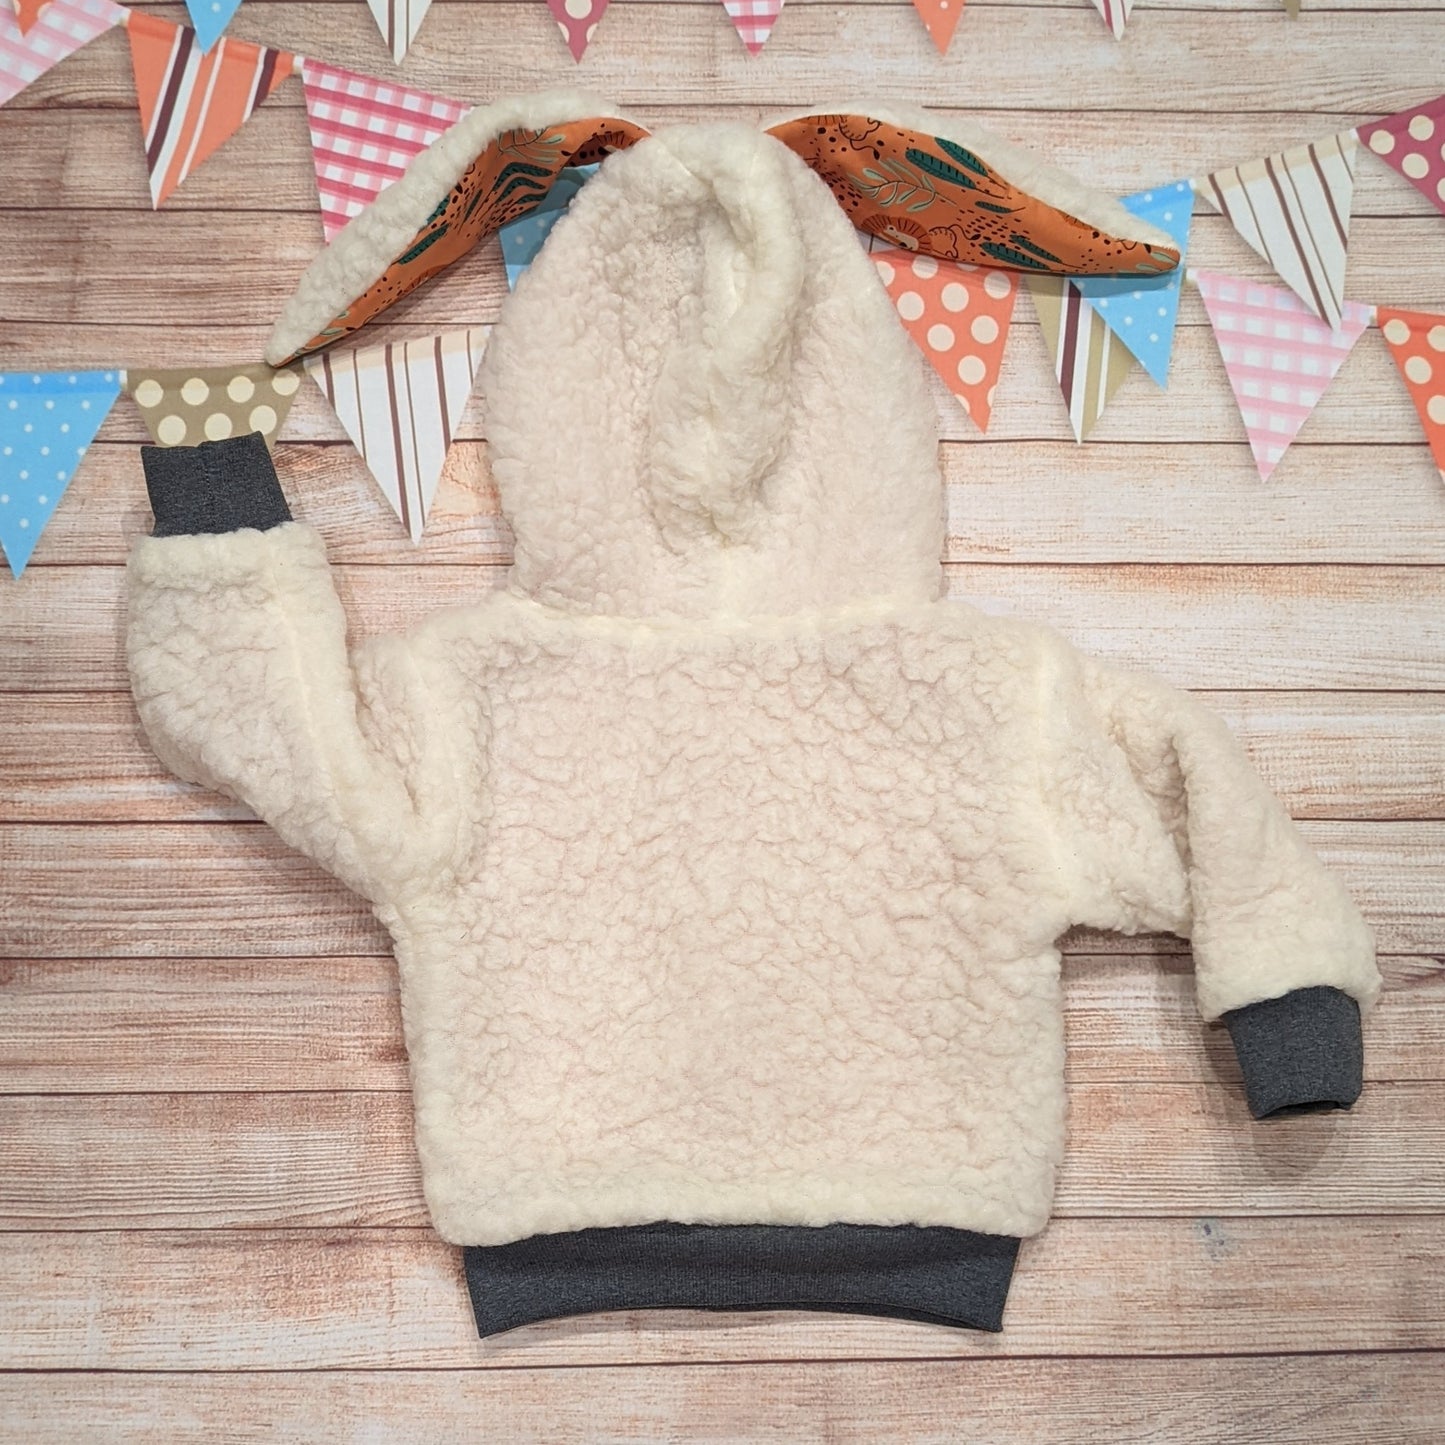 The gorgeous sherpa and orange lions reversible bunny hoodie. Handmade using sherpa fur, graphite ribbing and orange lions cotton French terry. Featuring front poppers and adorable bunny ears on the hood. Shown from the back.